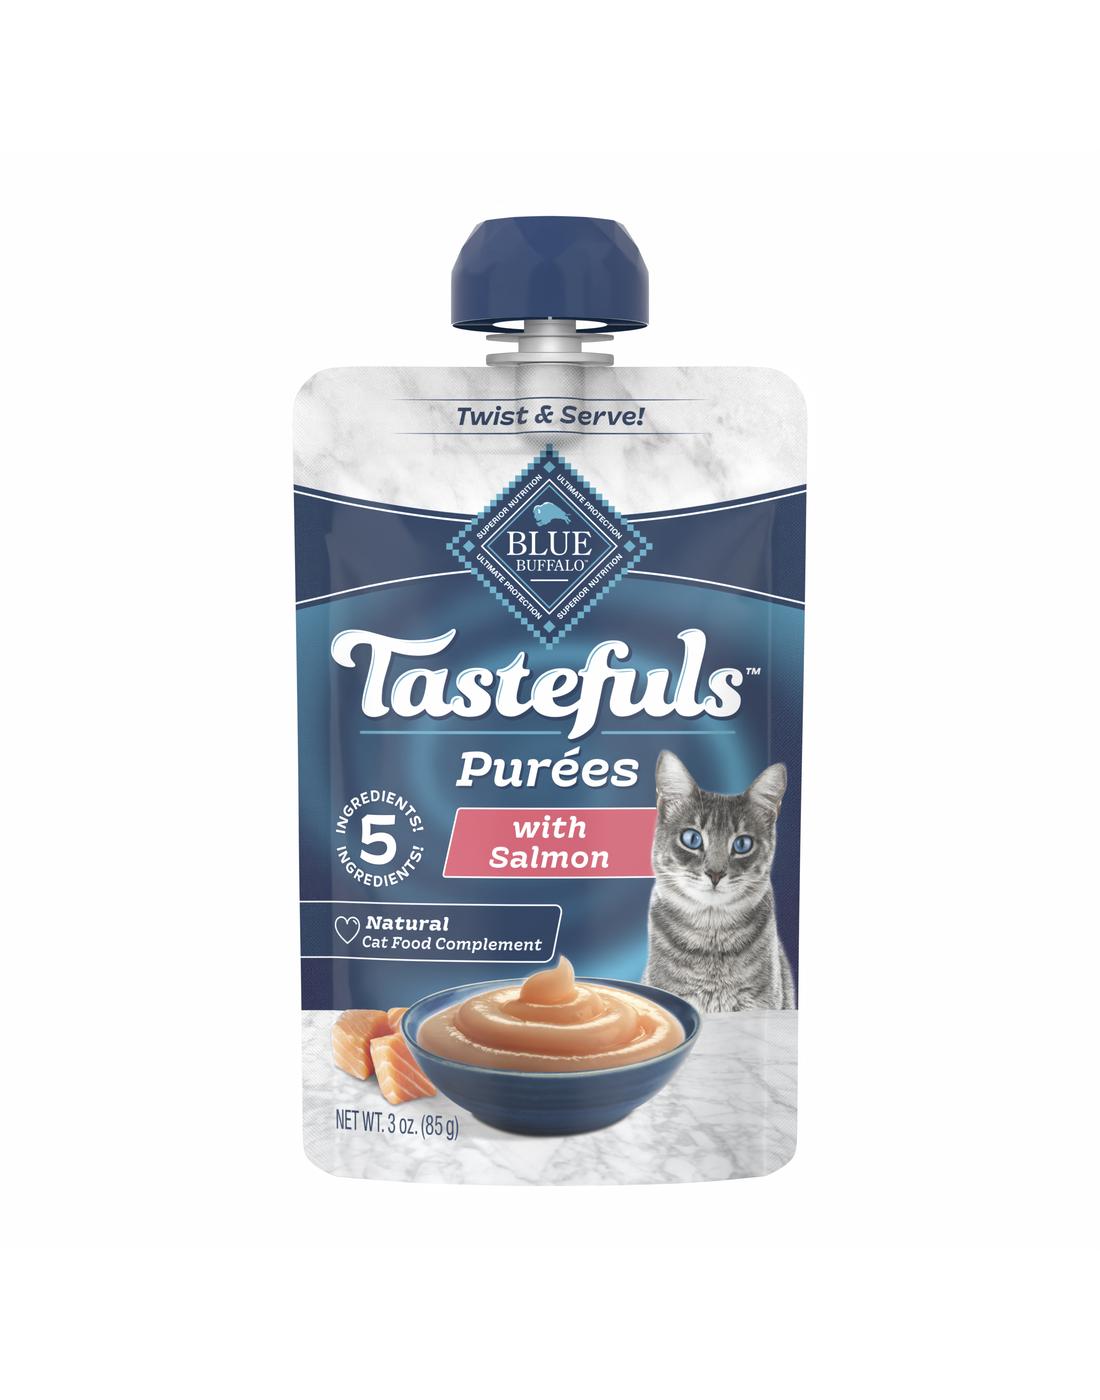 Blue Buffalo Tastefuls Puree Salmon Wet Cat Food Complement; image 1 of 2